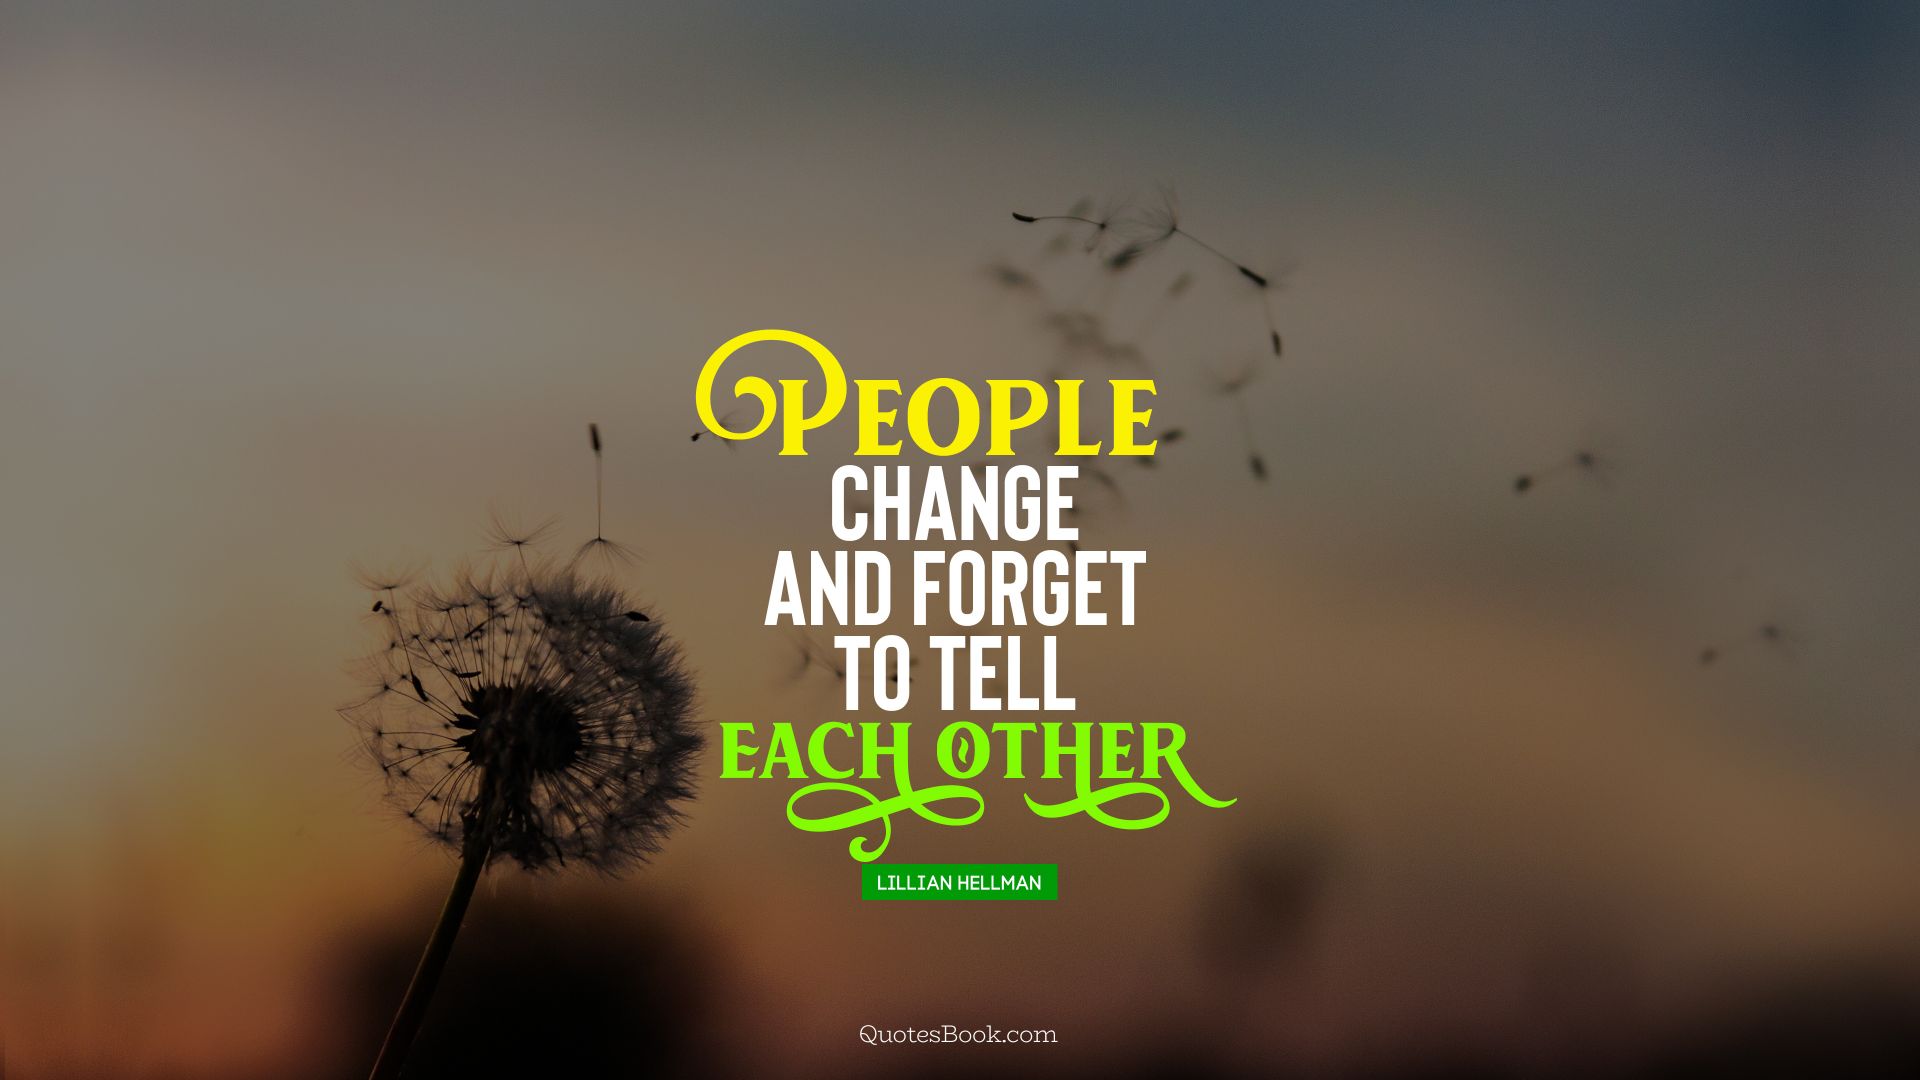 People change and forget to tell each other. - Quote by Lillian Hellman